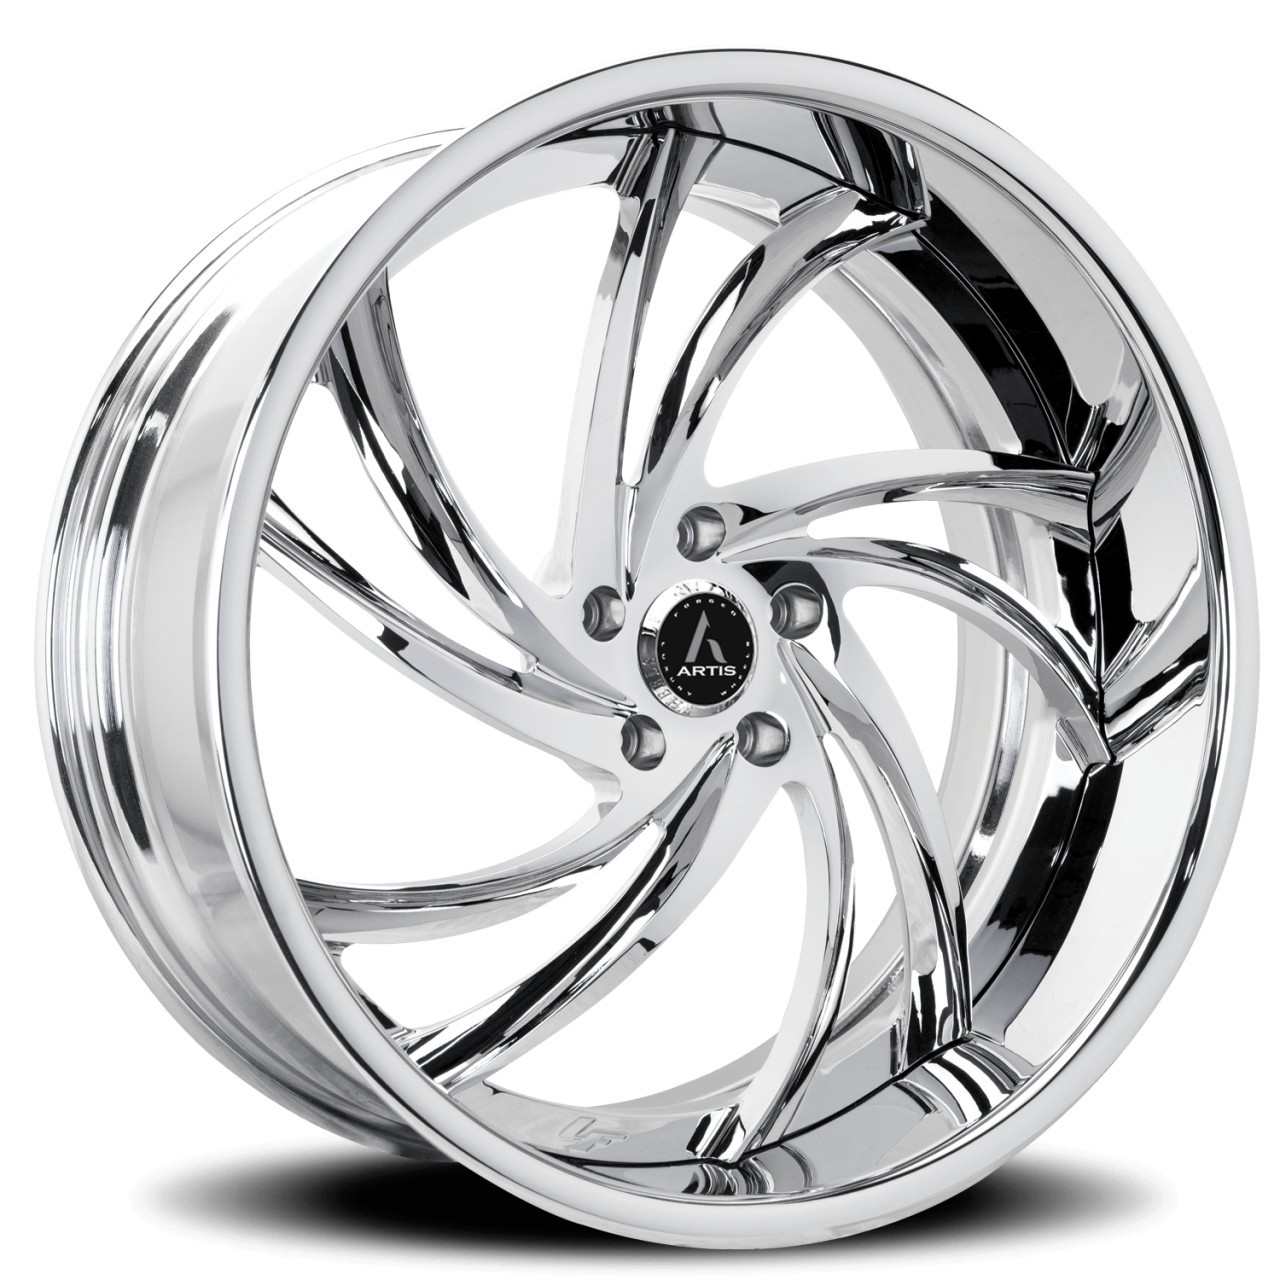 Artis Twister forged wheels